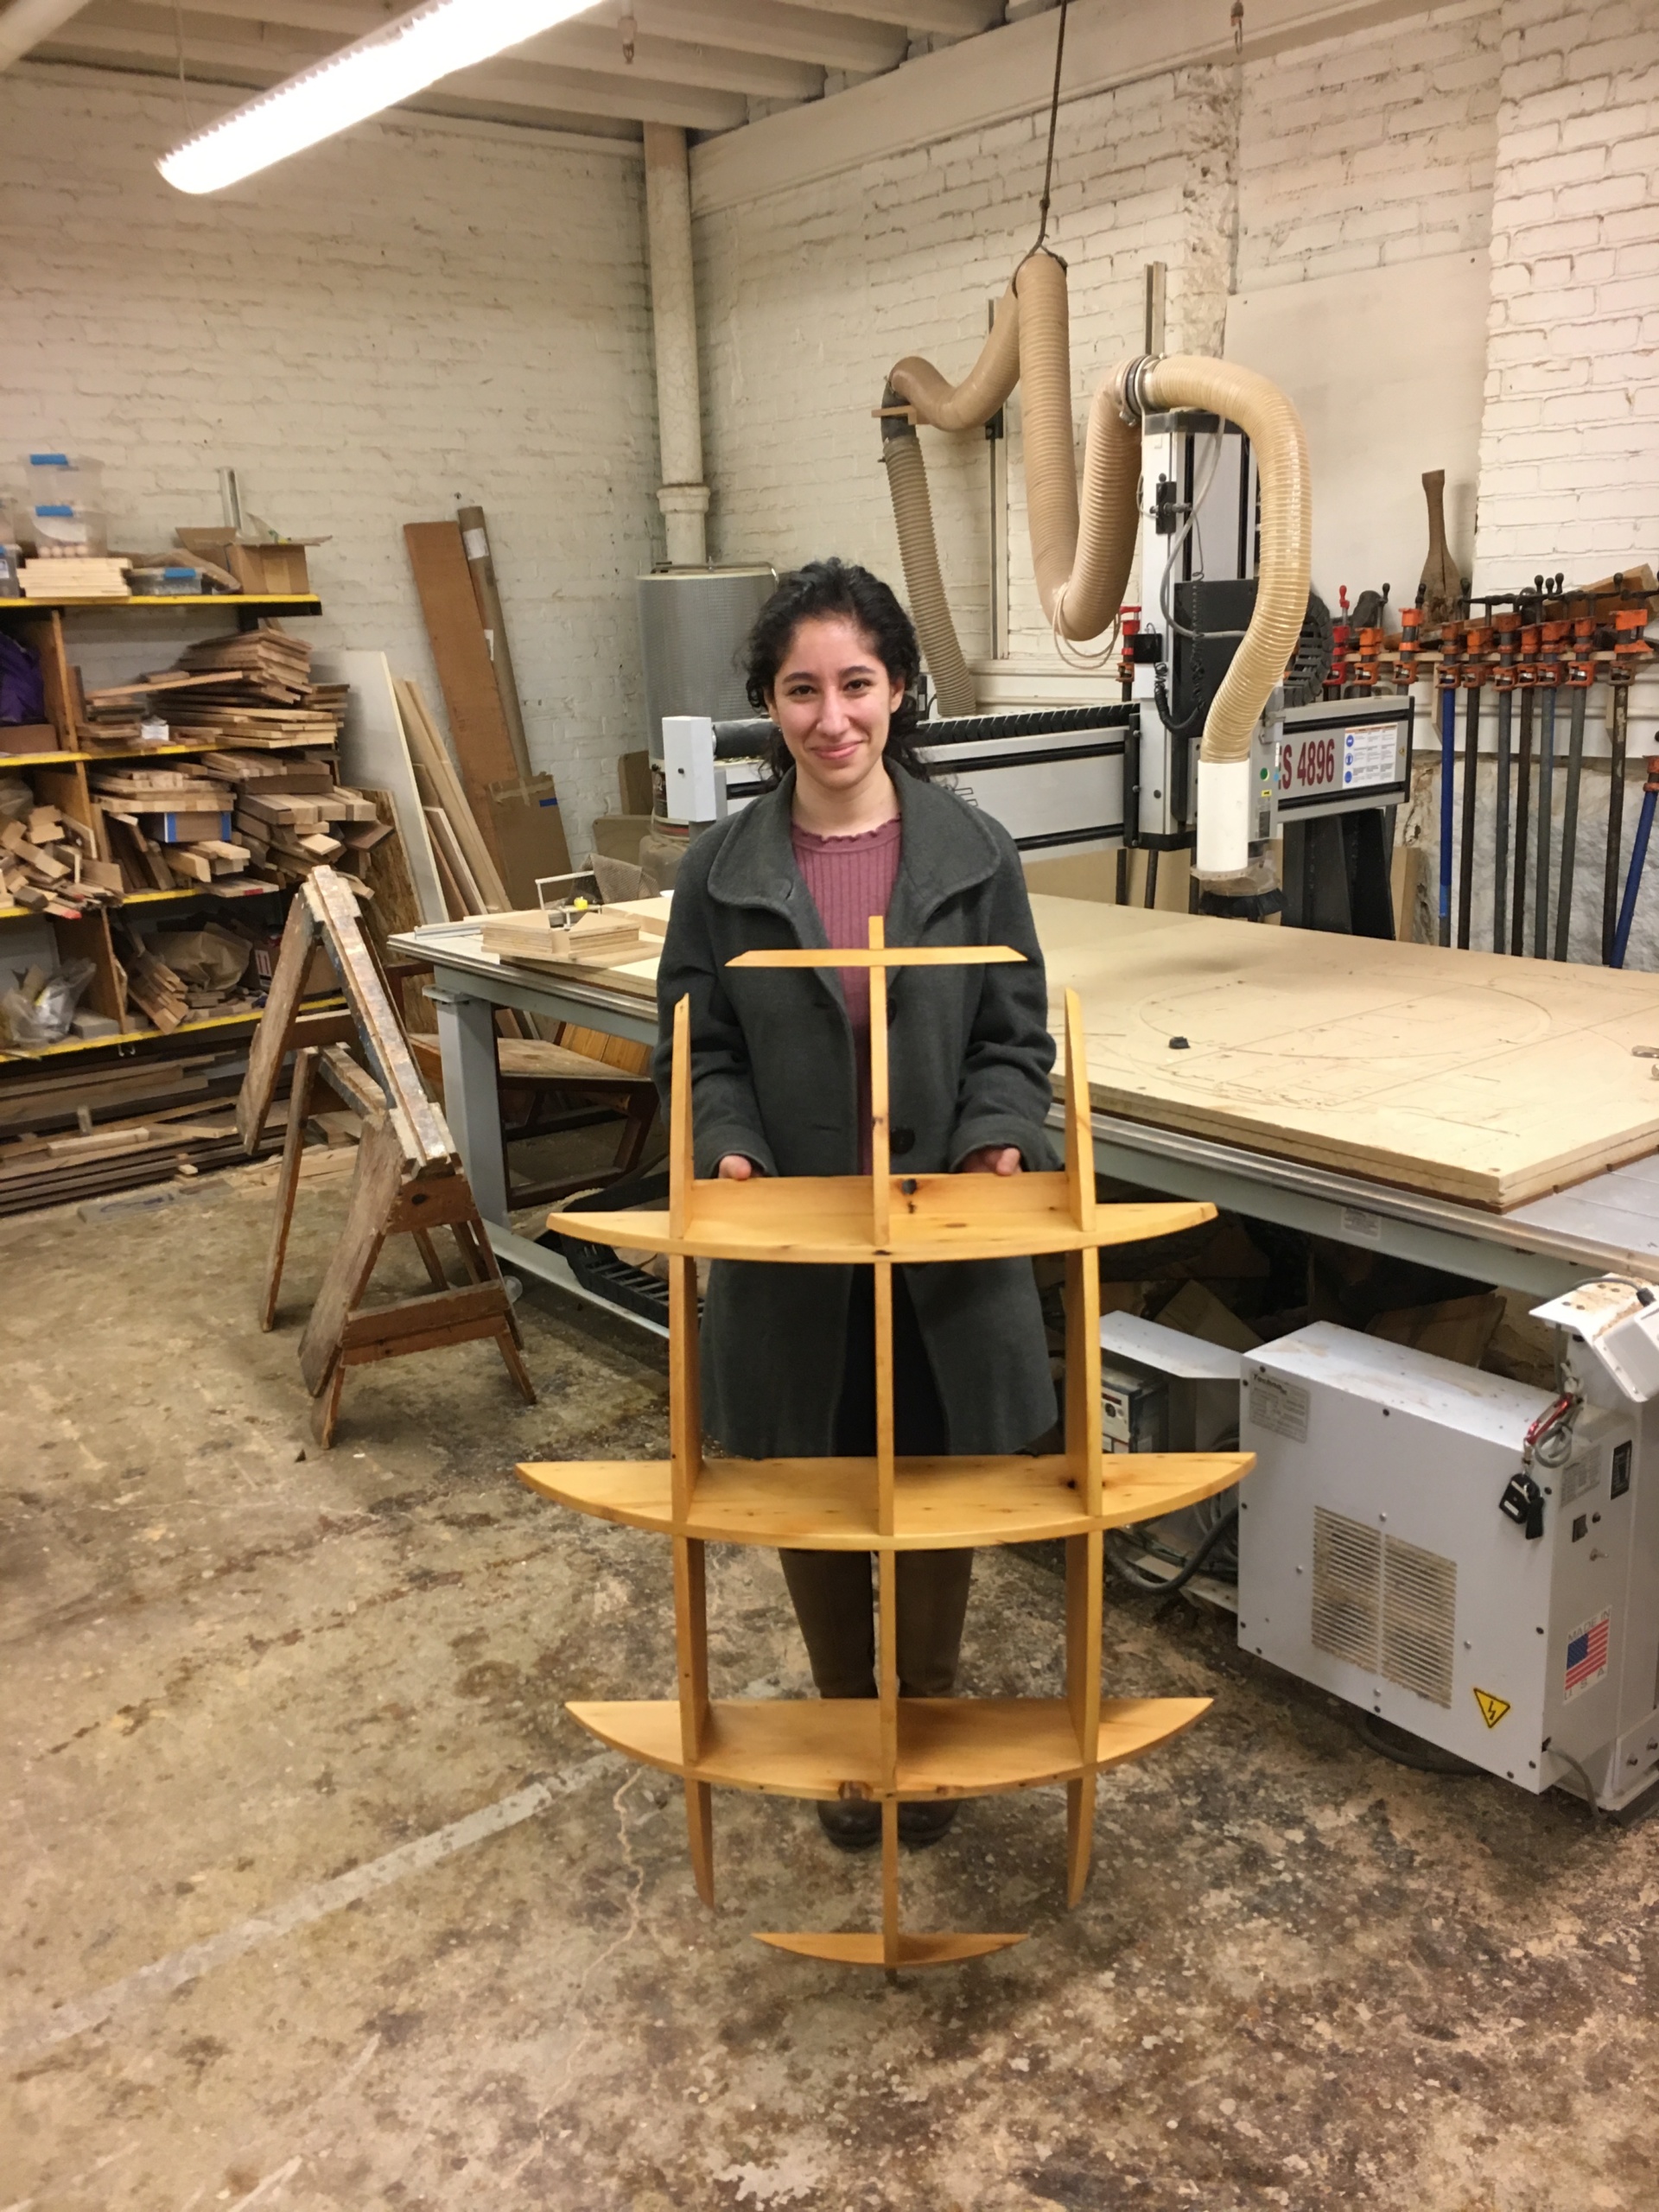 Michal learned wood working in the Hobby Shop and has become one of our most skilled members. Here, she is holding a recently completed set of shelves made from reclaimed old growth pine.